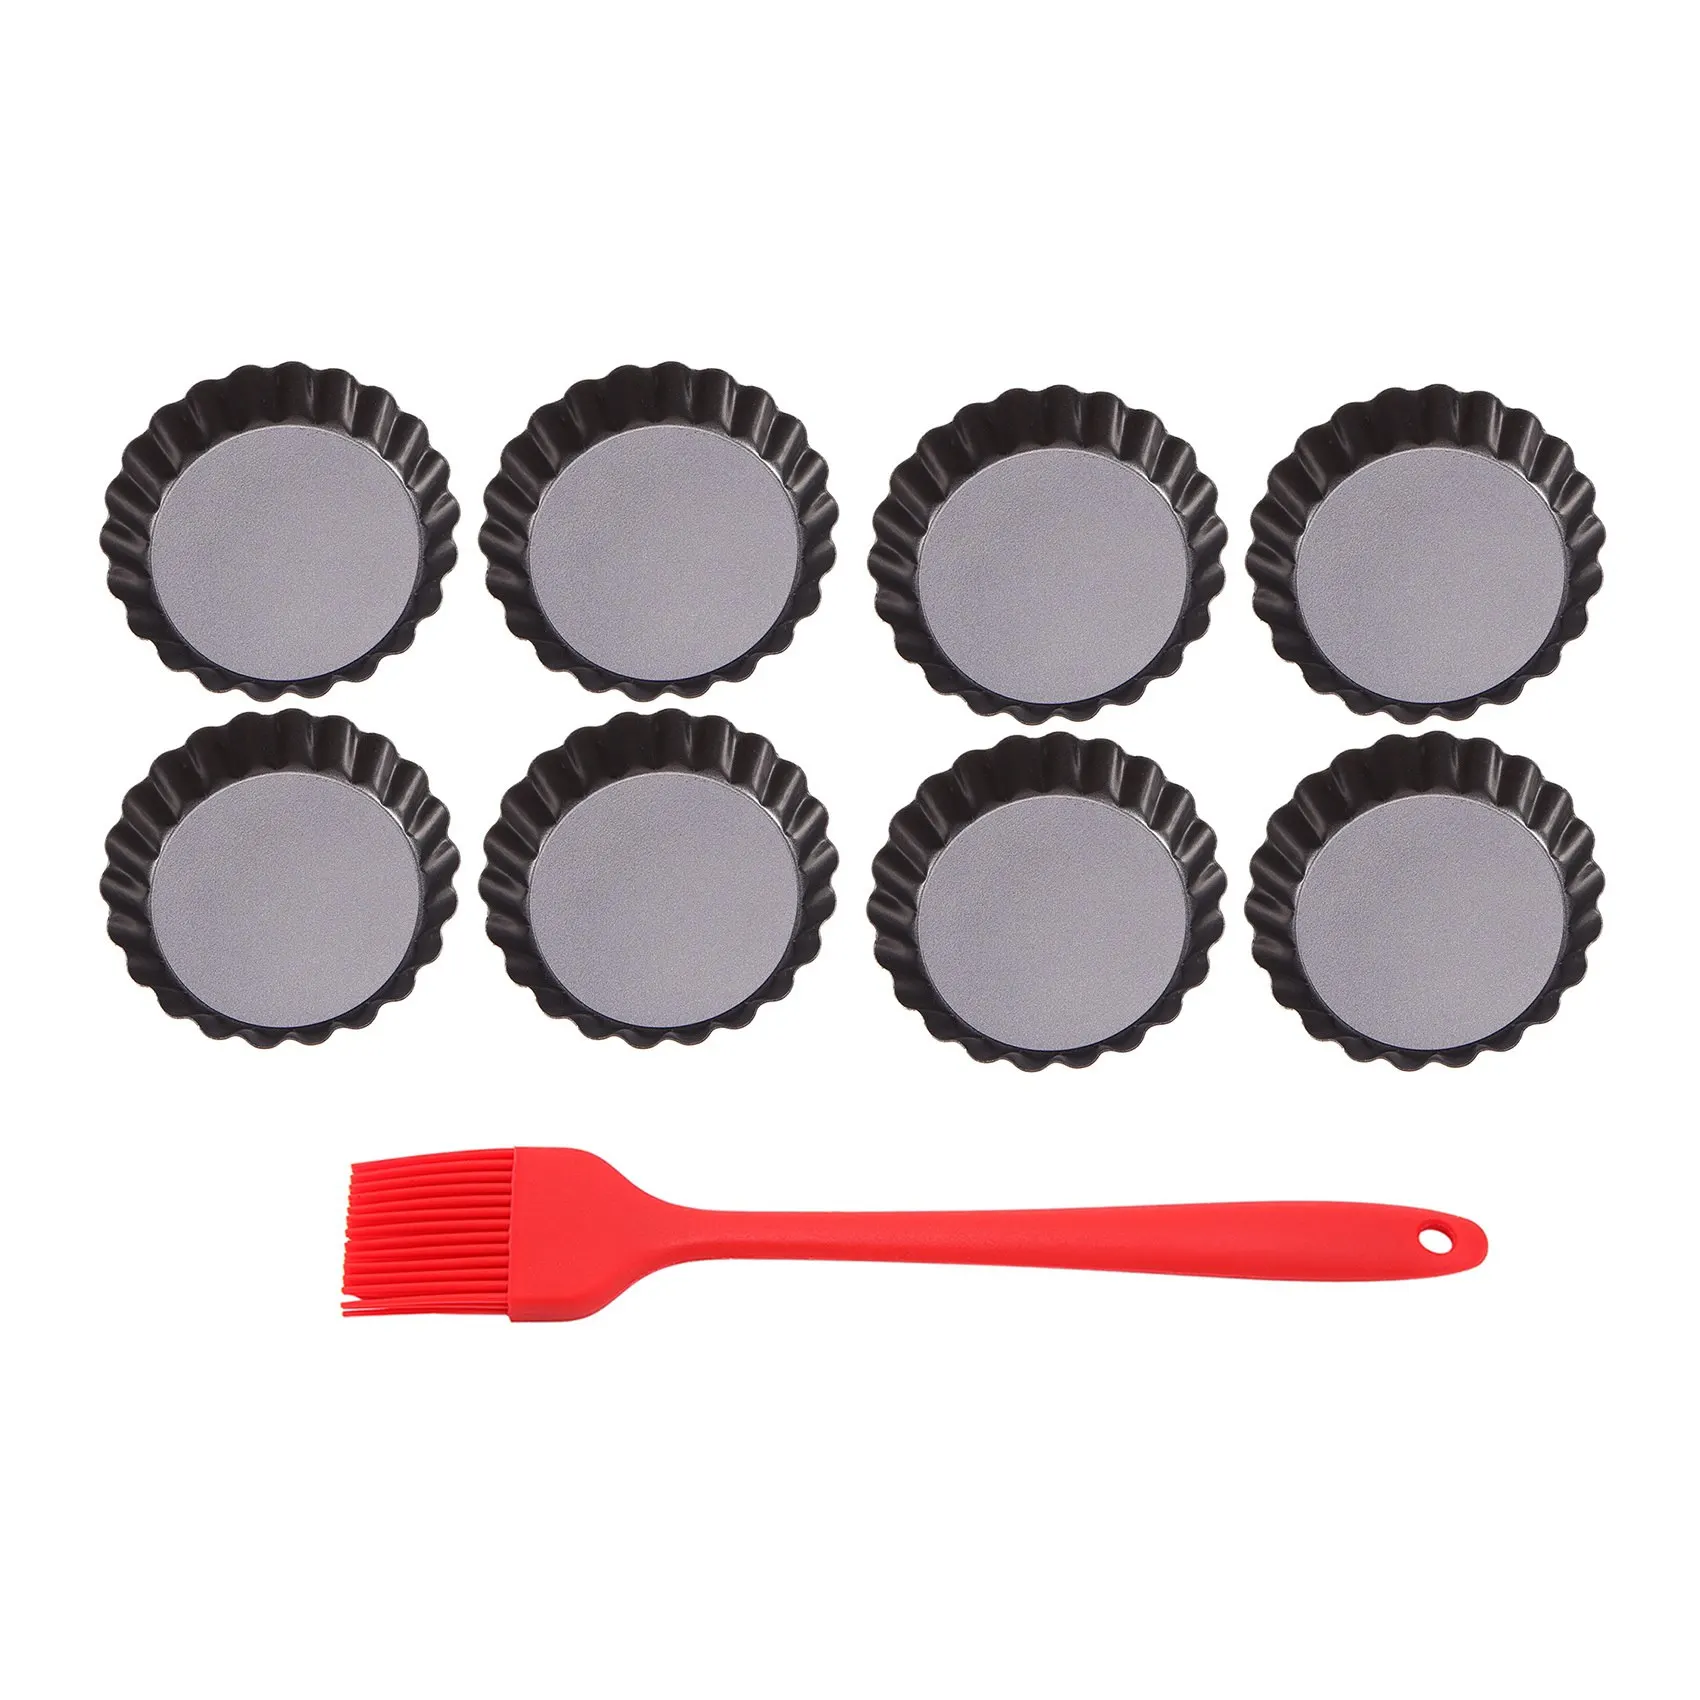 

8 Pack Mini Tart Pans 3 Inch with Removable Bottom Round Quiche Pan for Pies, Mousse Cakes, Dessert Baking